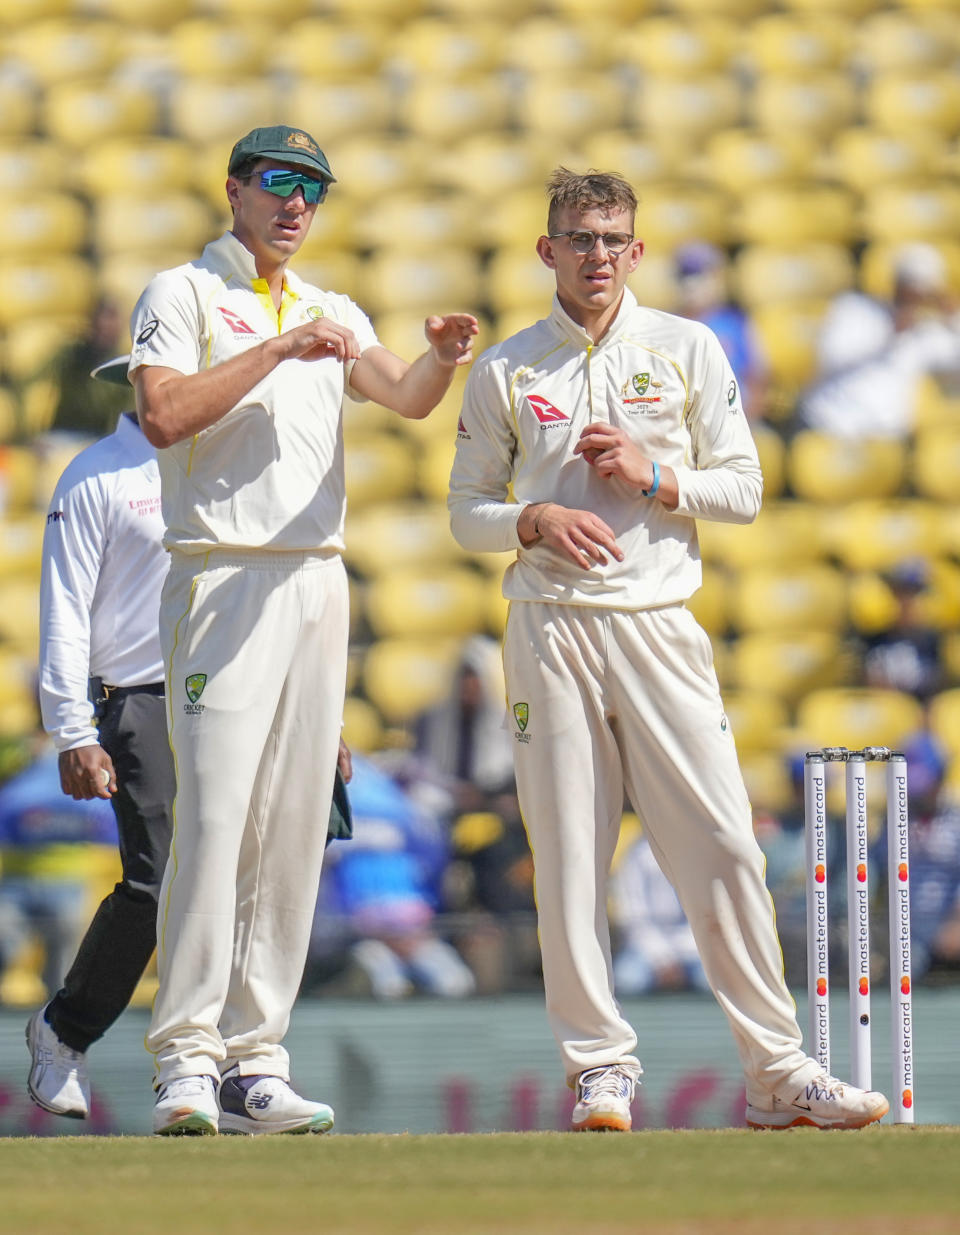 Australia's captain Pat Cummins, left, adjusts fielding as Todd Murphy watches during the third day of the first cricket test match between India and Australia in Nagpur, India, Saturday, Feb. 11, 2023. (AP Photo/Rafiq Maqbool)